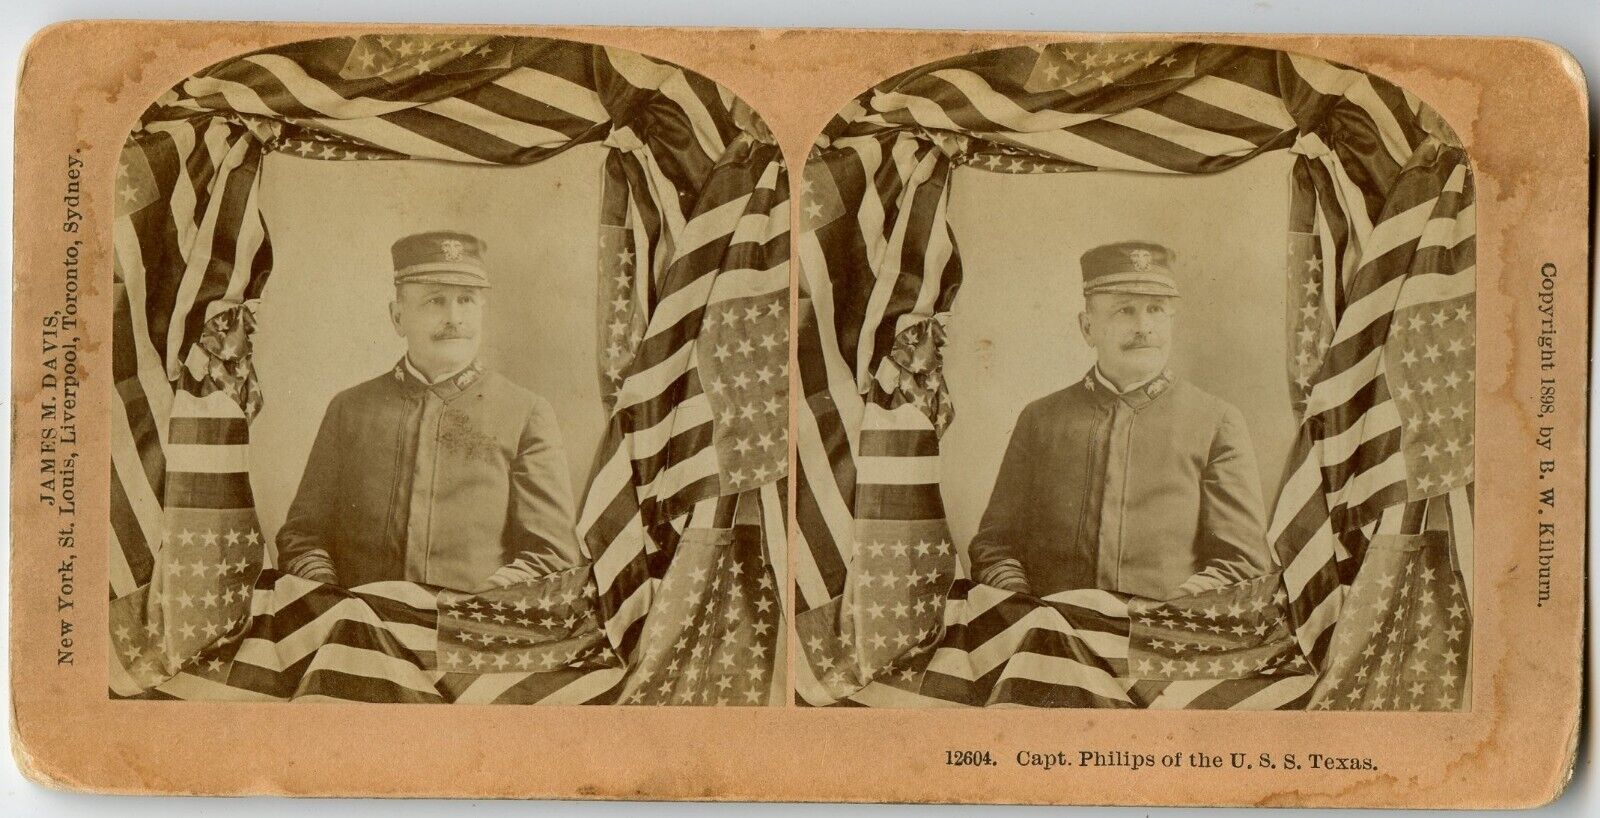 Capt. Phillips of US Navy Ship Texas Vintage Patriotic Photo Stereoview 1898